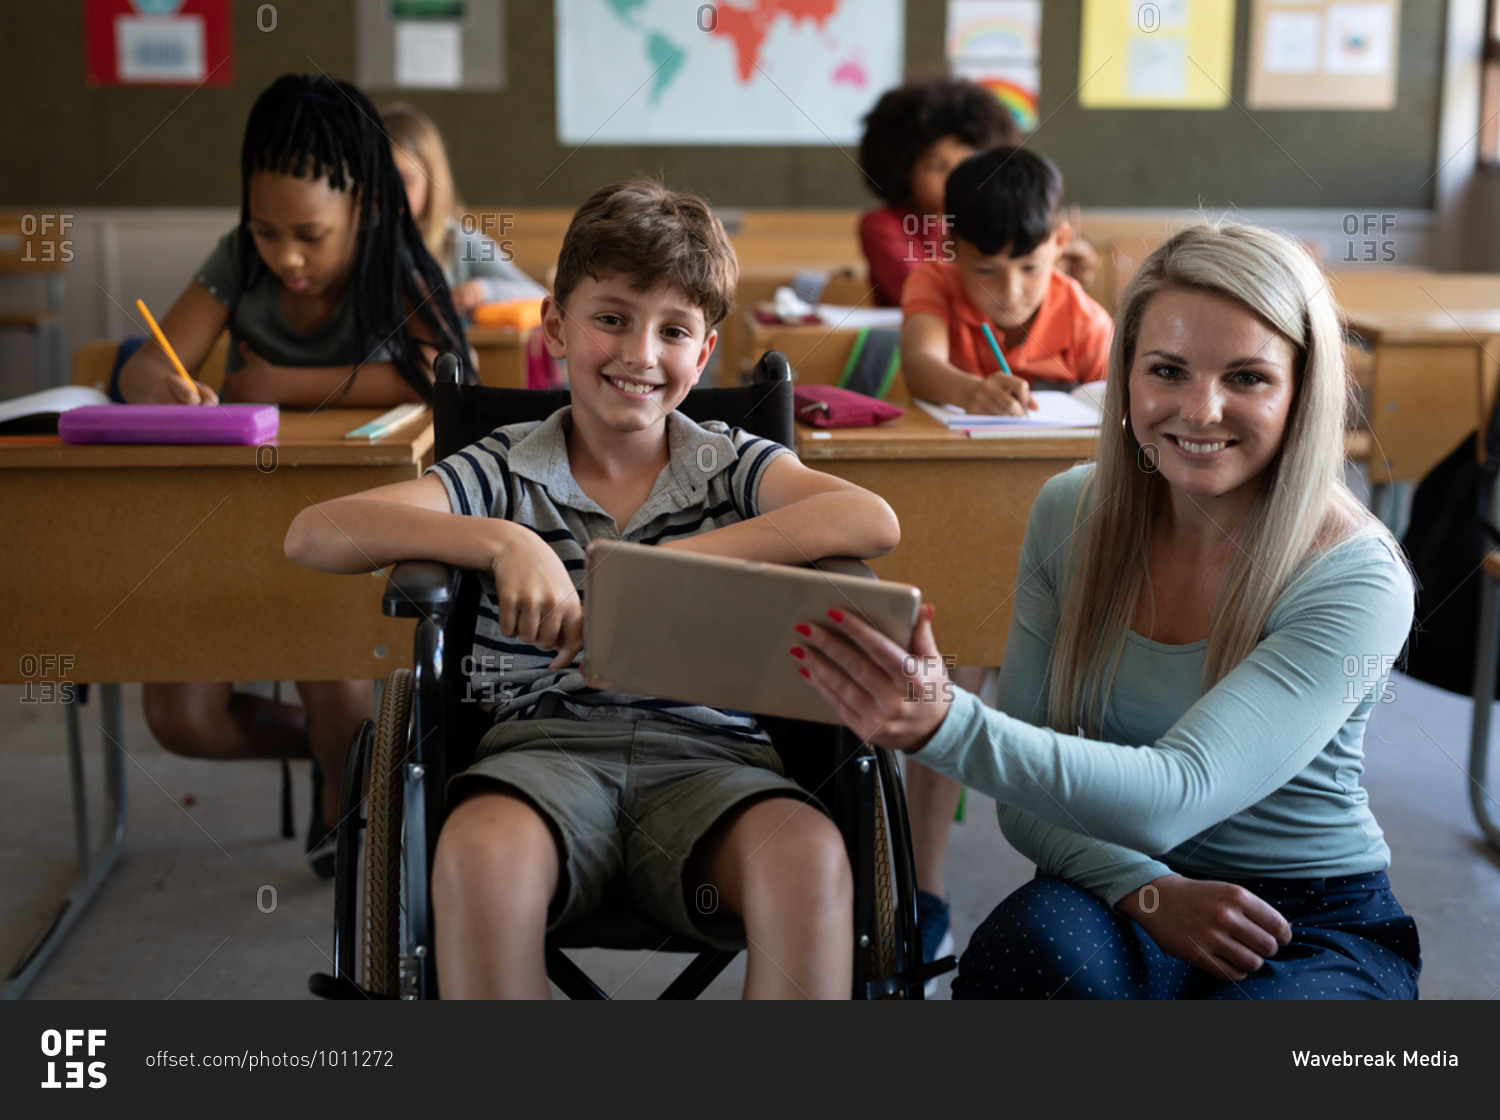 Portrait of disable Caucasian boy sitting in his wheelchair and his female teacher using tablet in the classroom. Primary education social distancing health safety during Covid19 Coronavirus pandemic.